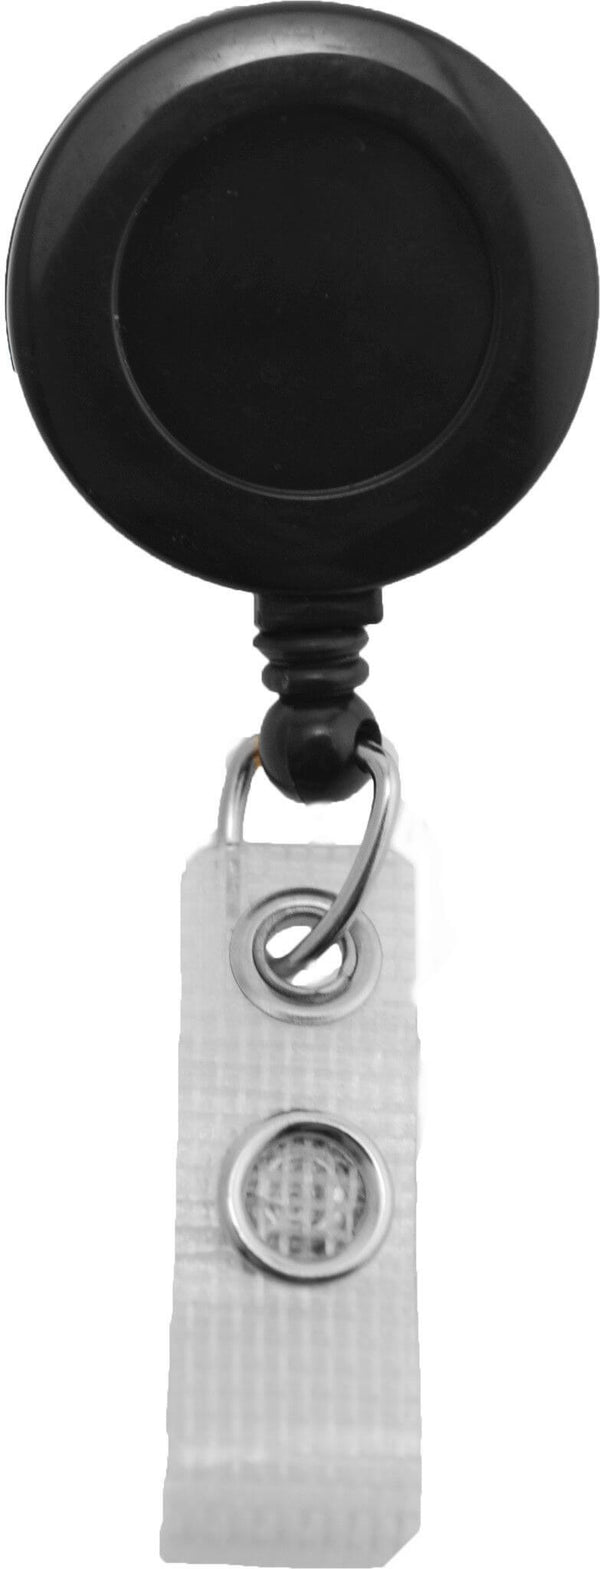 Black Badge Reel with Reinforced Vinyl Strap | Spring Clip - 25 - All Things Identification